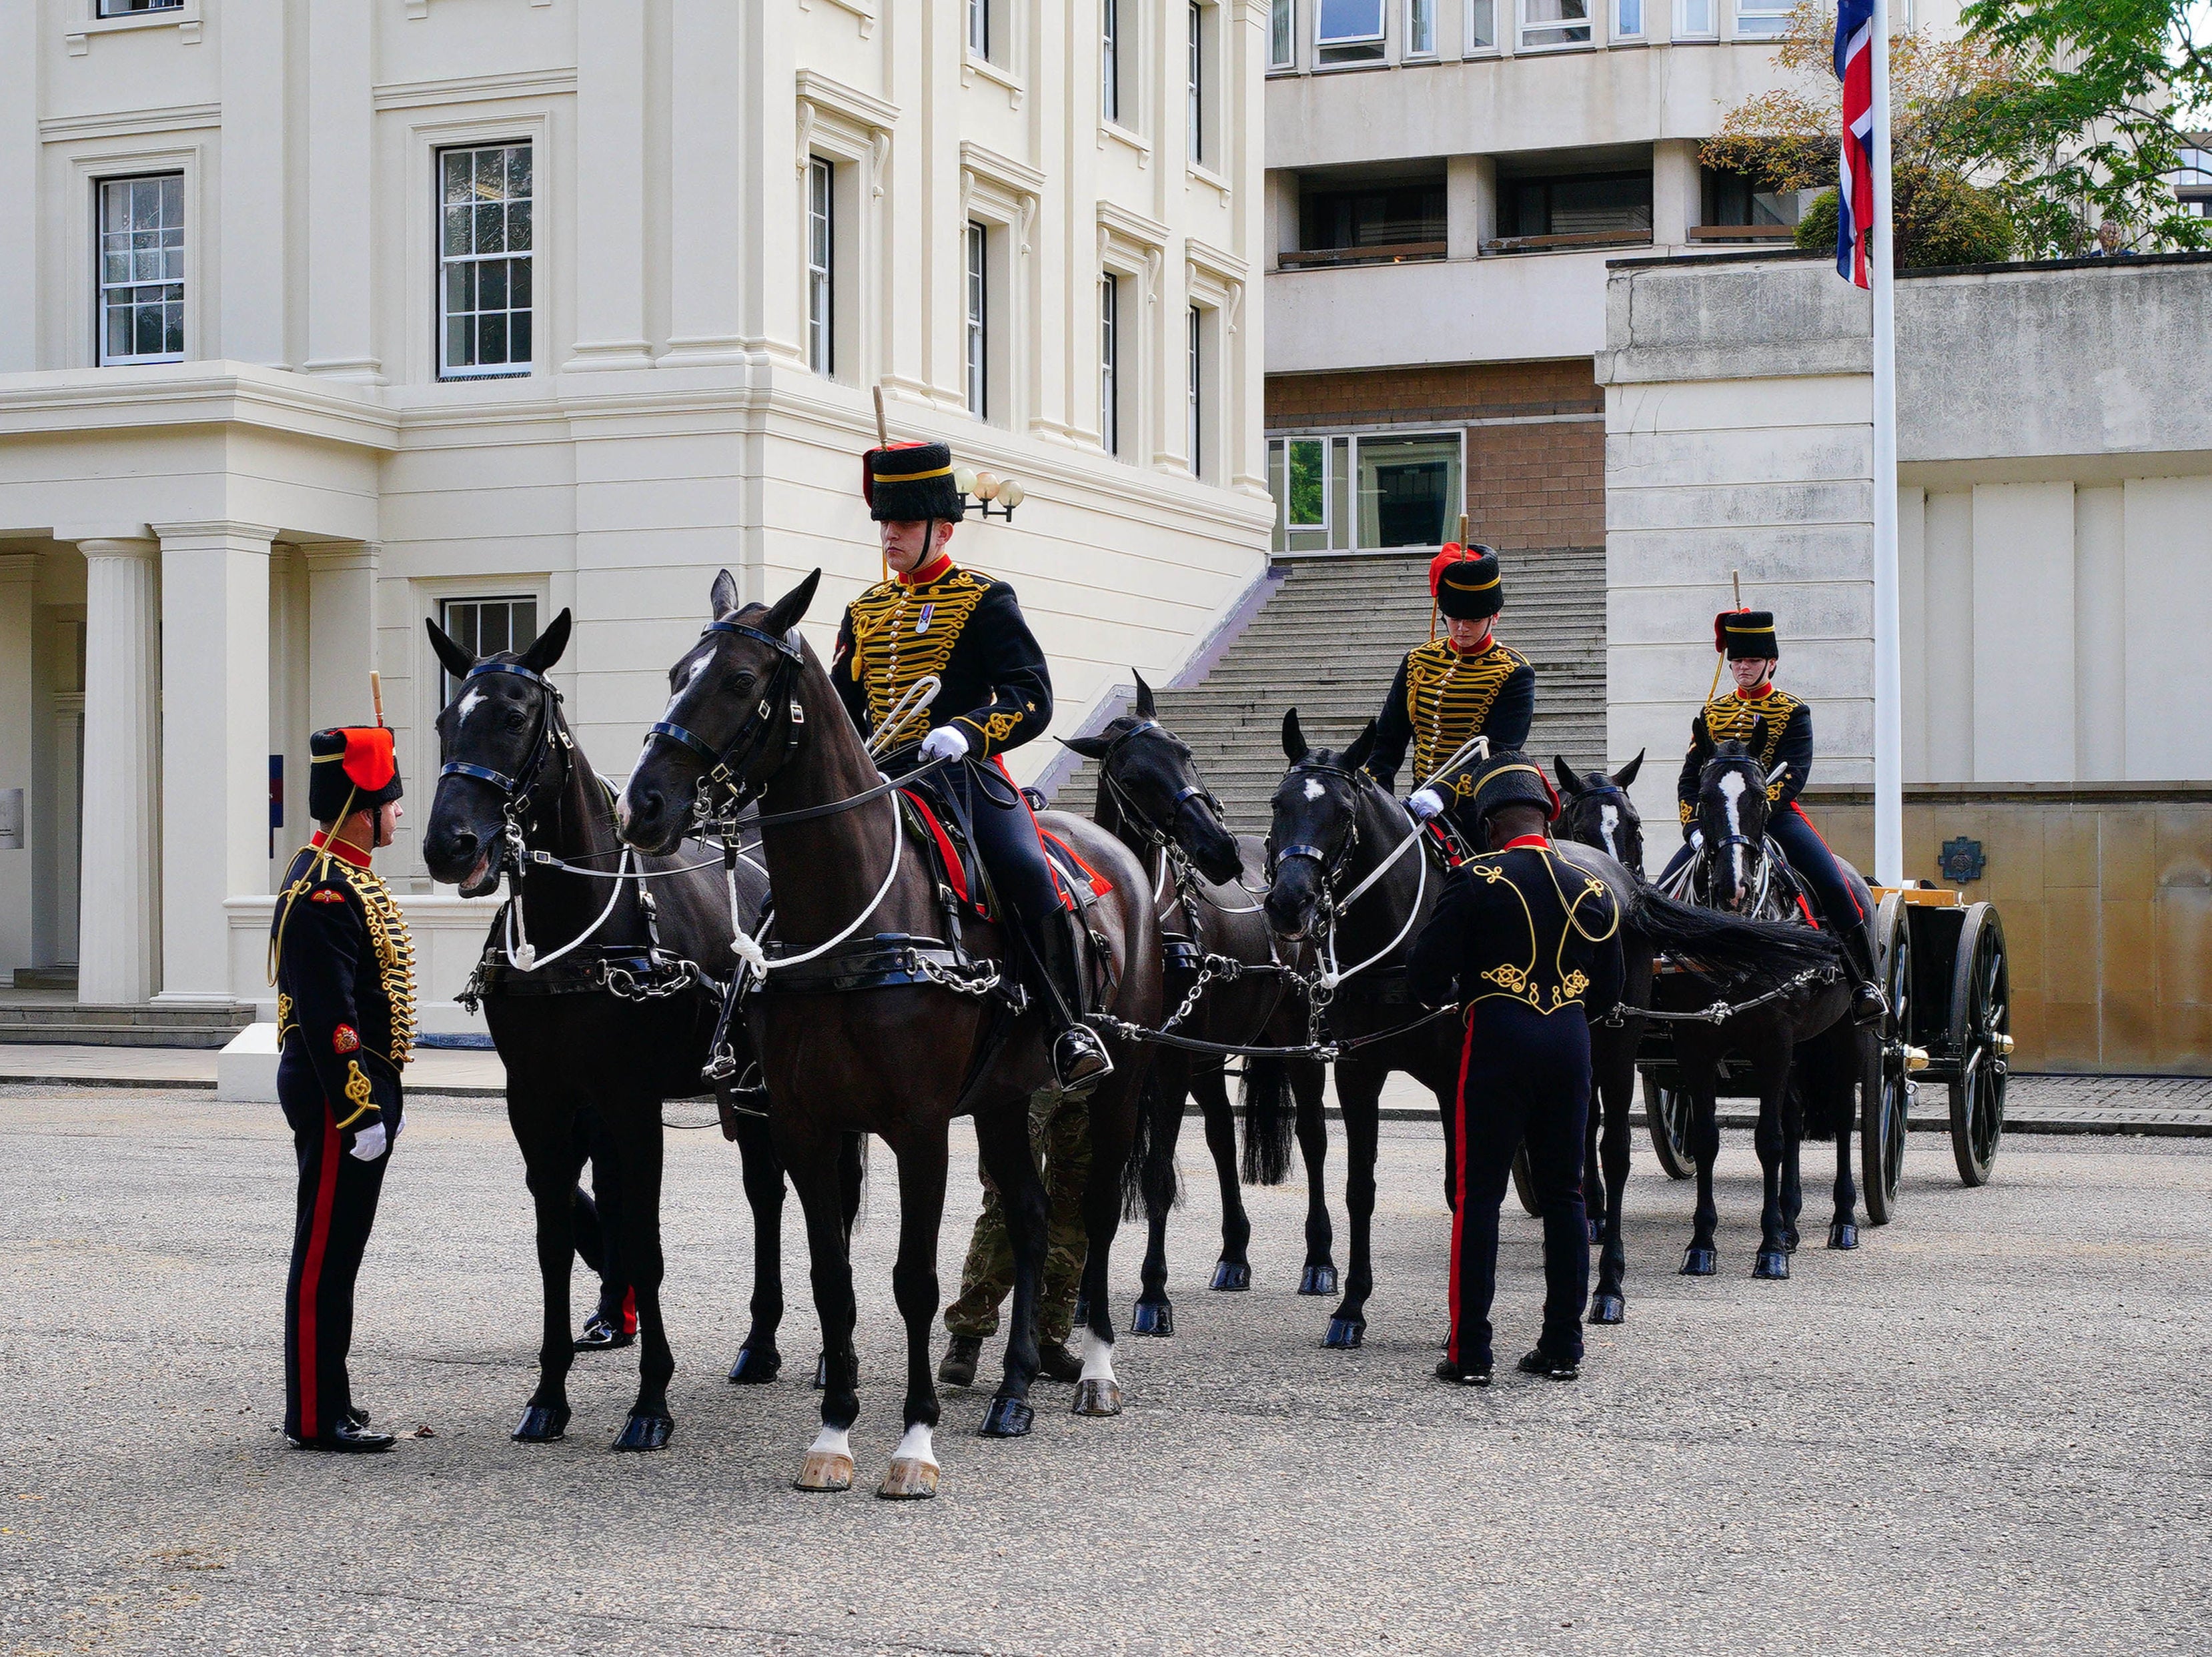 The Queen’s coffin will be carried on a gun carriage drawn by the Royal Navy just as Queen Victoria’s funeral in 1901